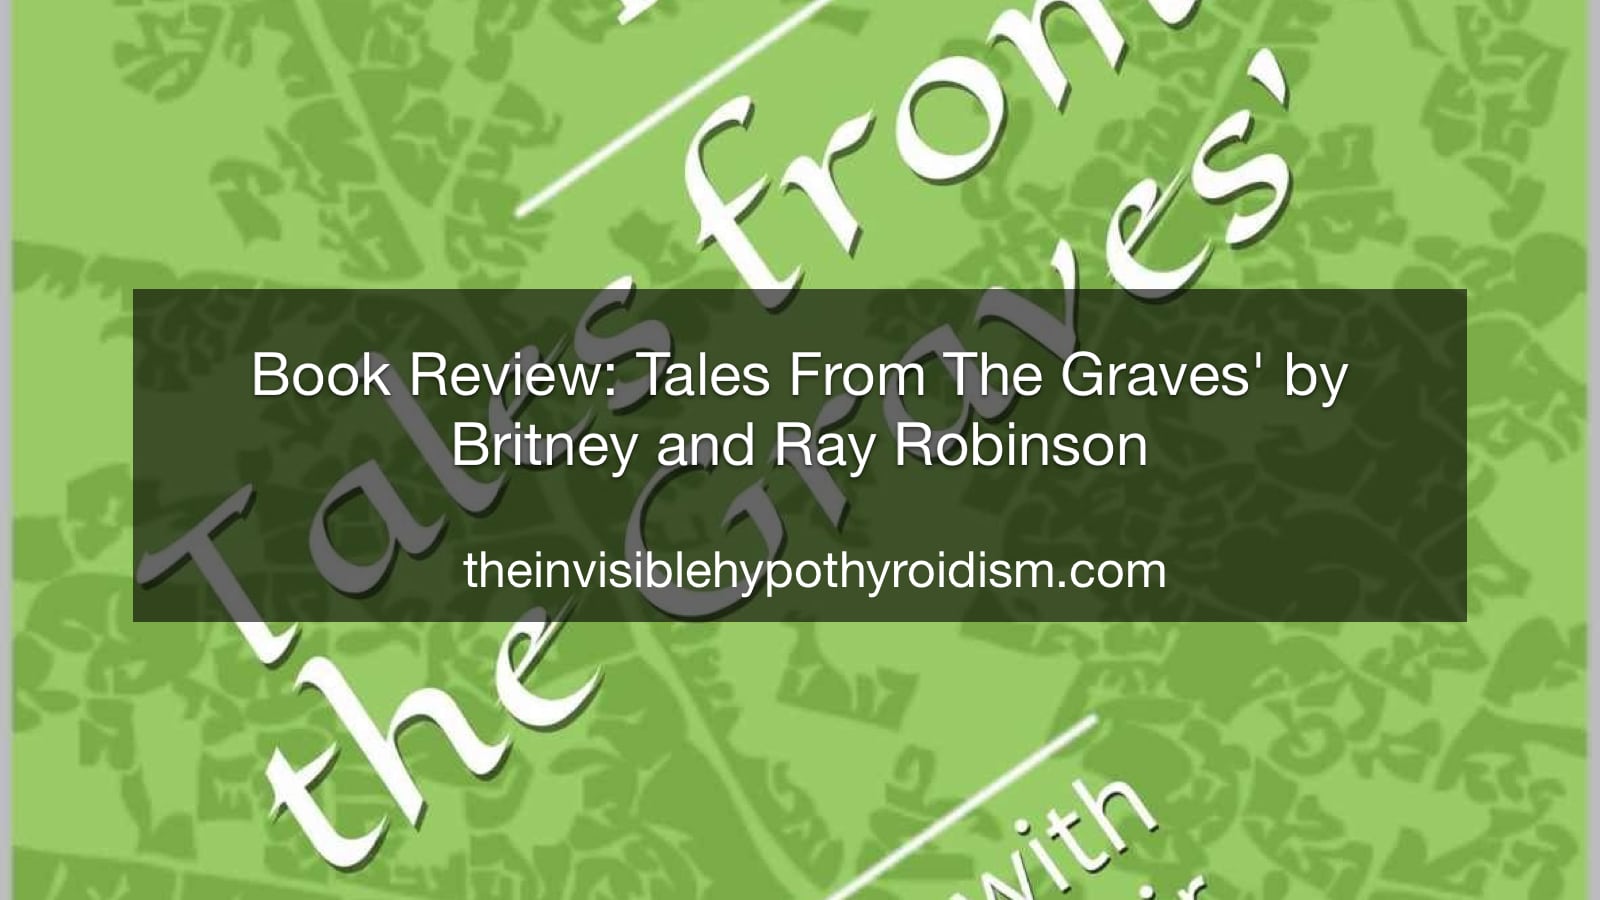 Book Review: Tales From The Graves' by Britney and Ray Robinson